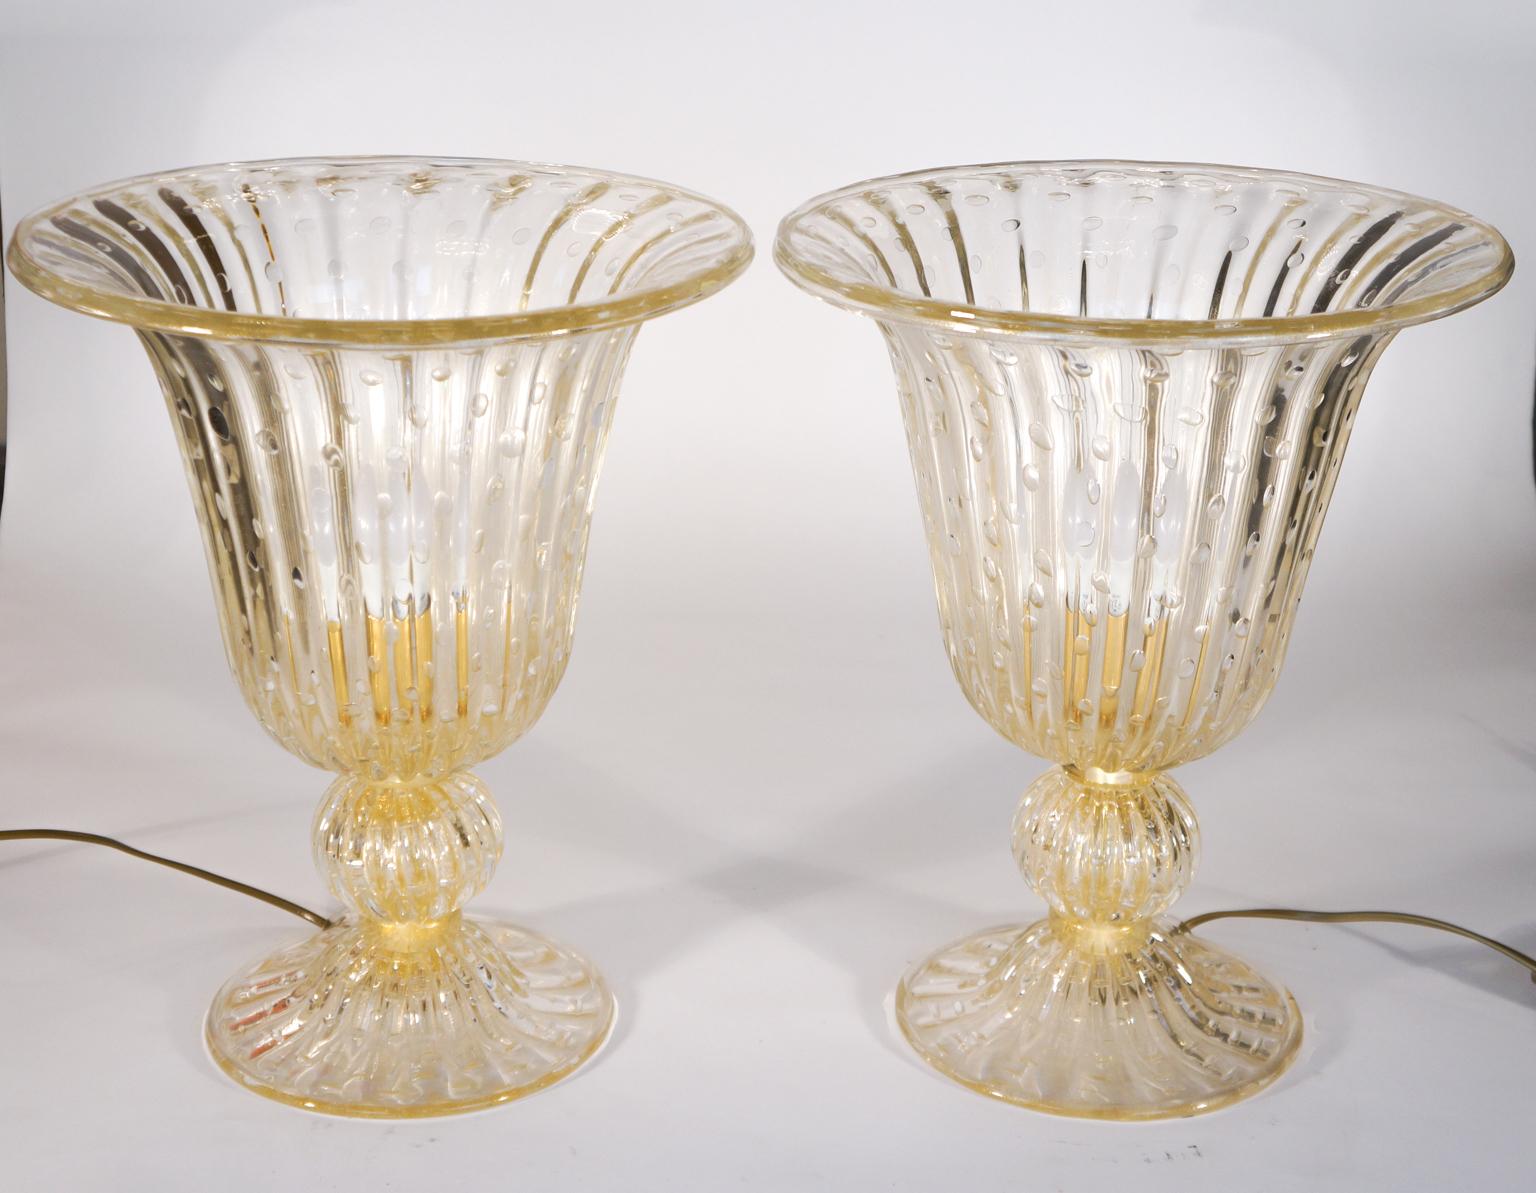 Exclusive pair of Murano glass table lamps in crystal color with 24-carat gold leaf decorations and inner bubbles. The products are entirely handmade by the master glassmaker of Murano Alberto Dona
Project of the Murano glass master Alberto Donà in